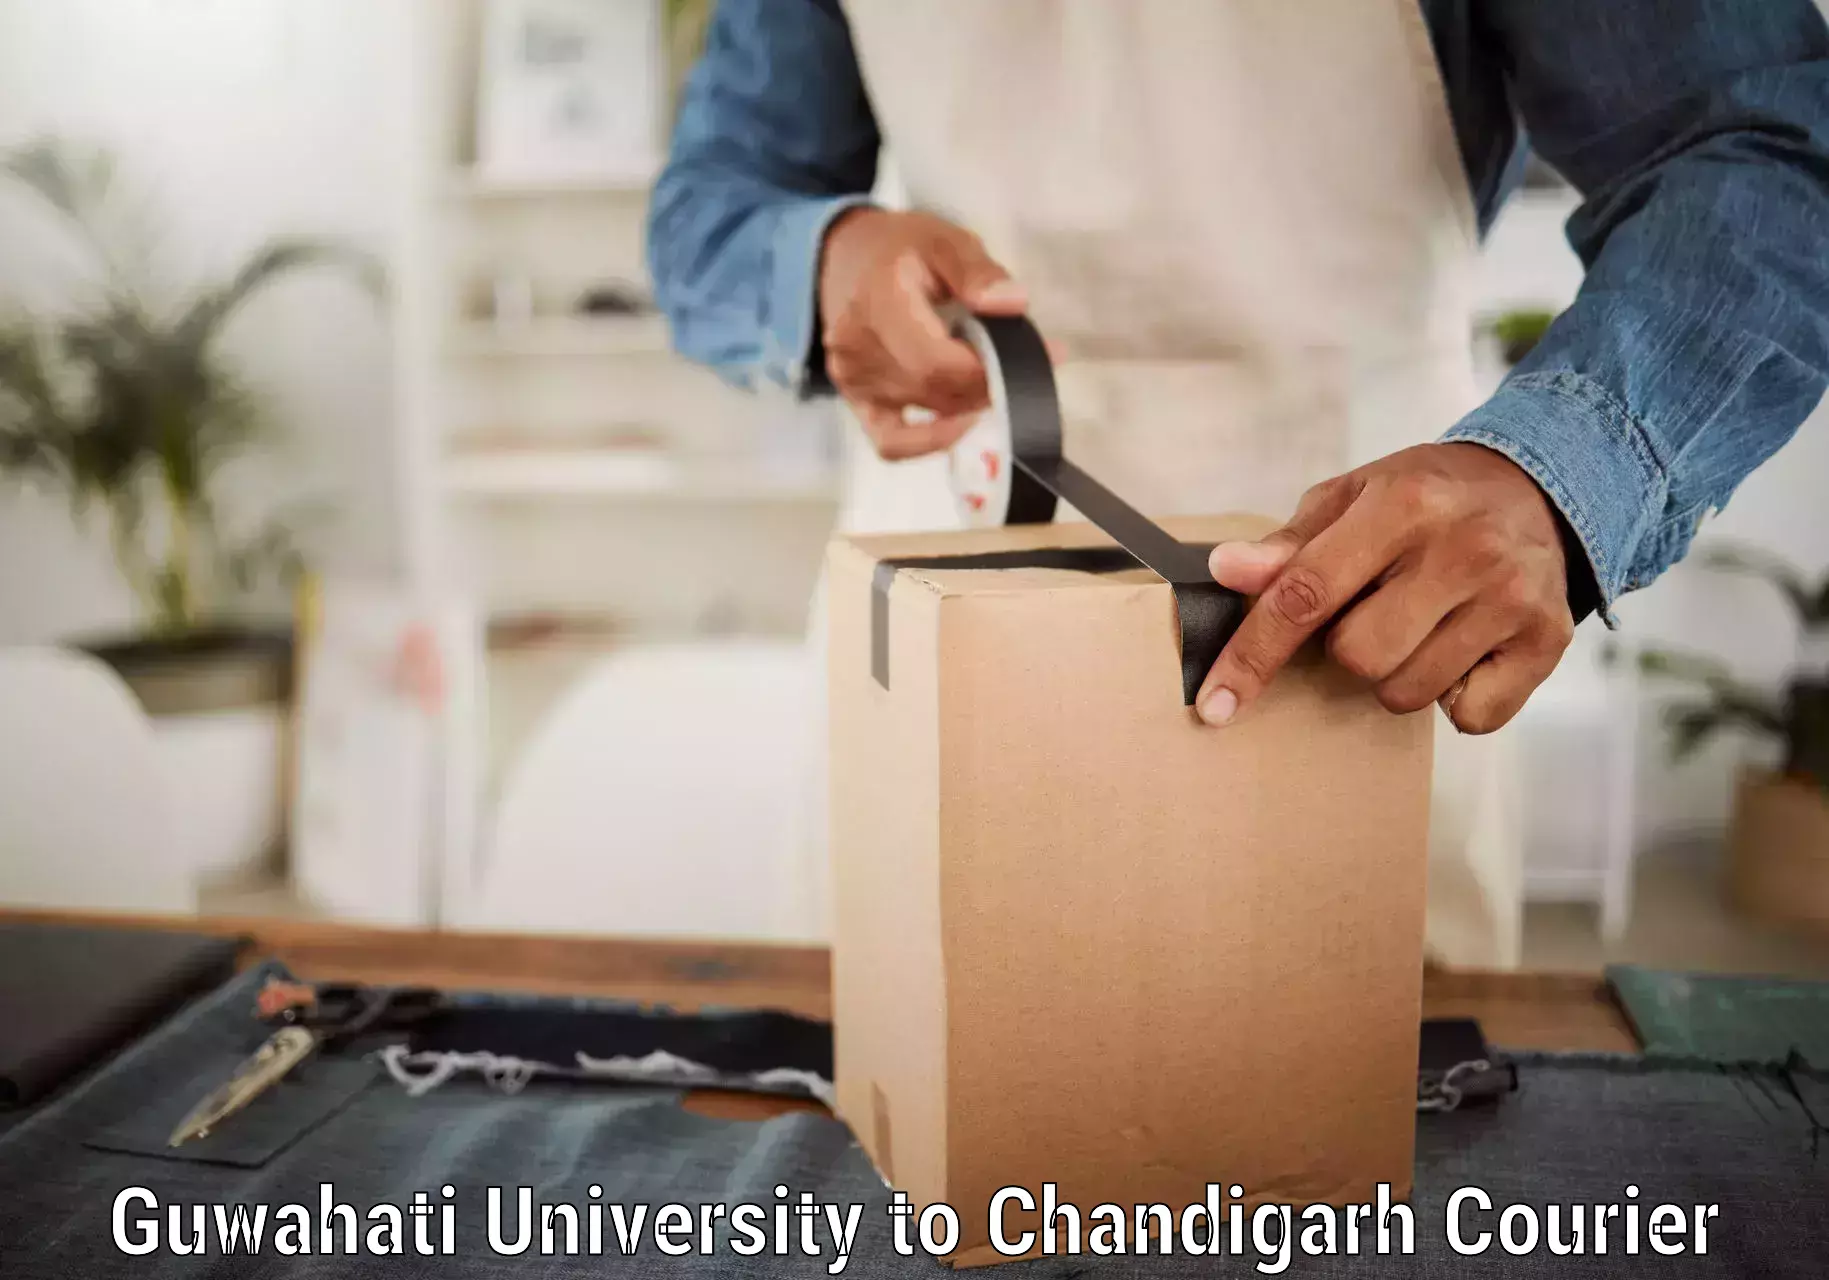 Easy access courier services Guwahati University to Panjab University Chandigarh